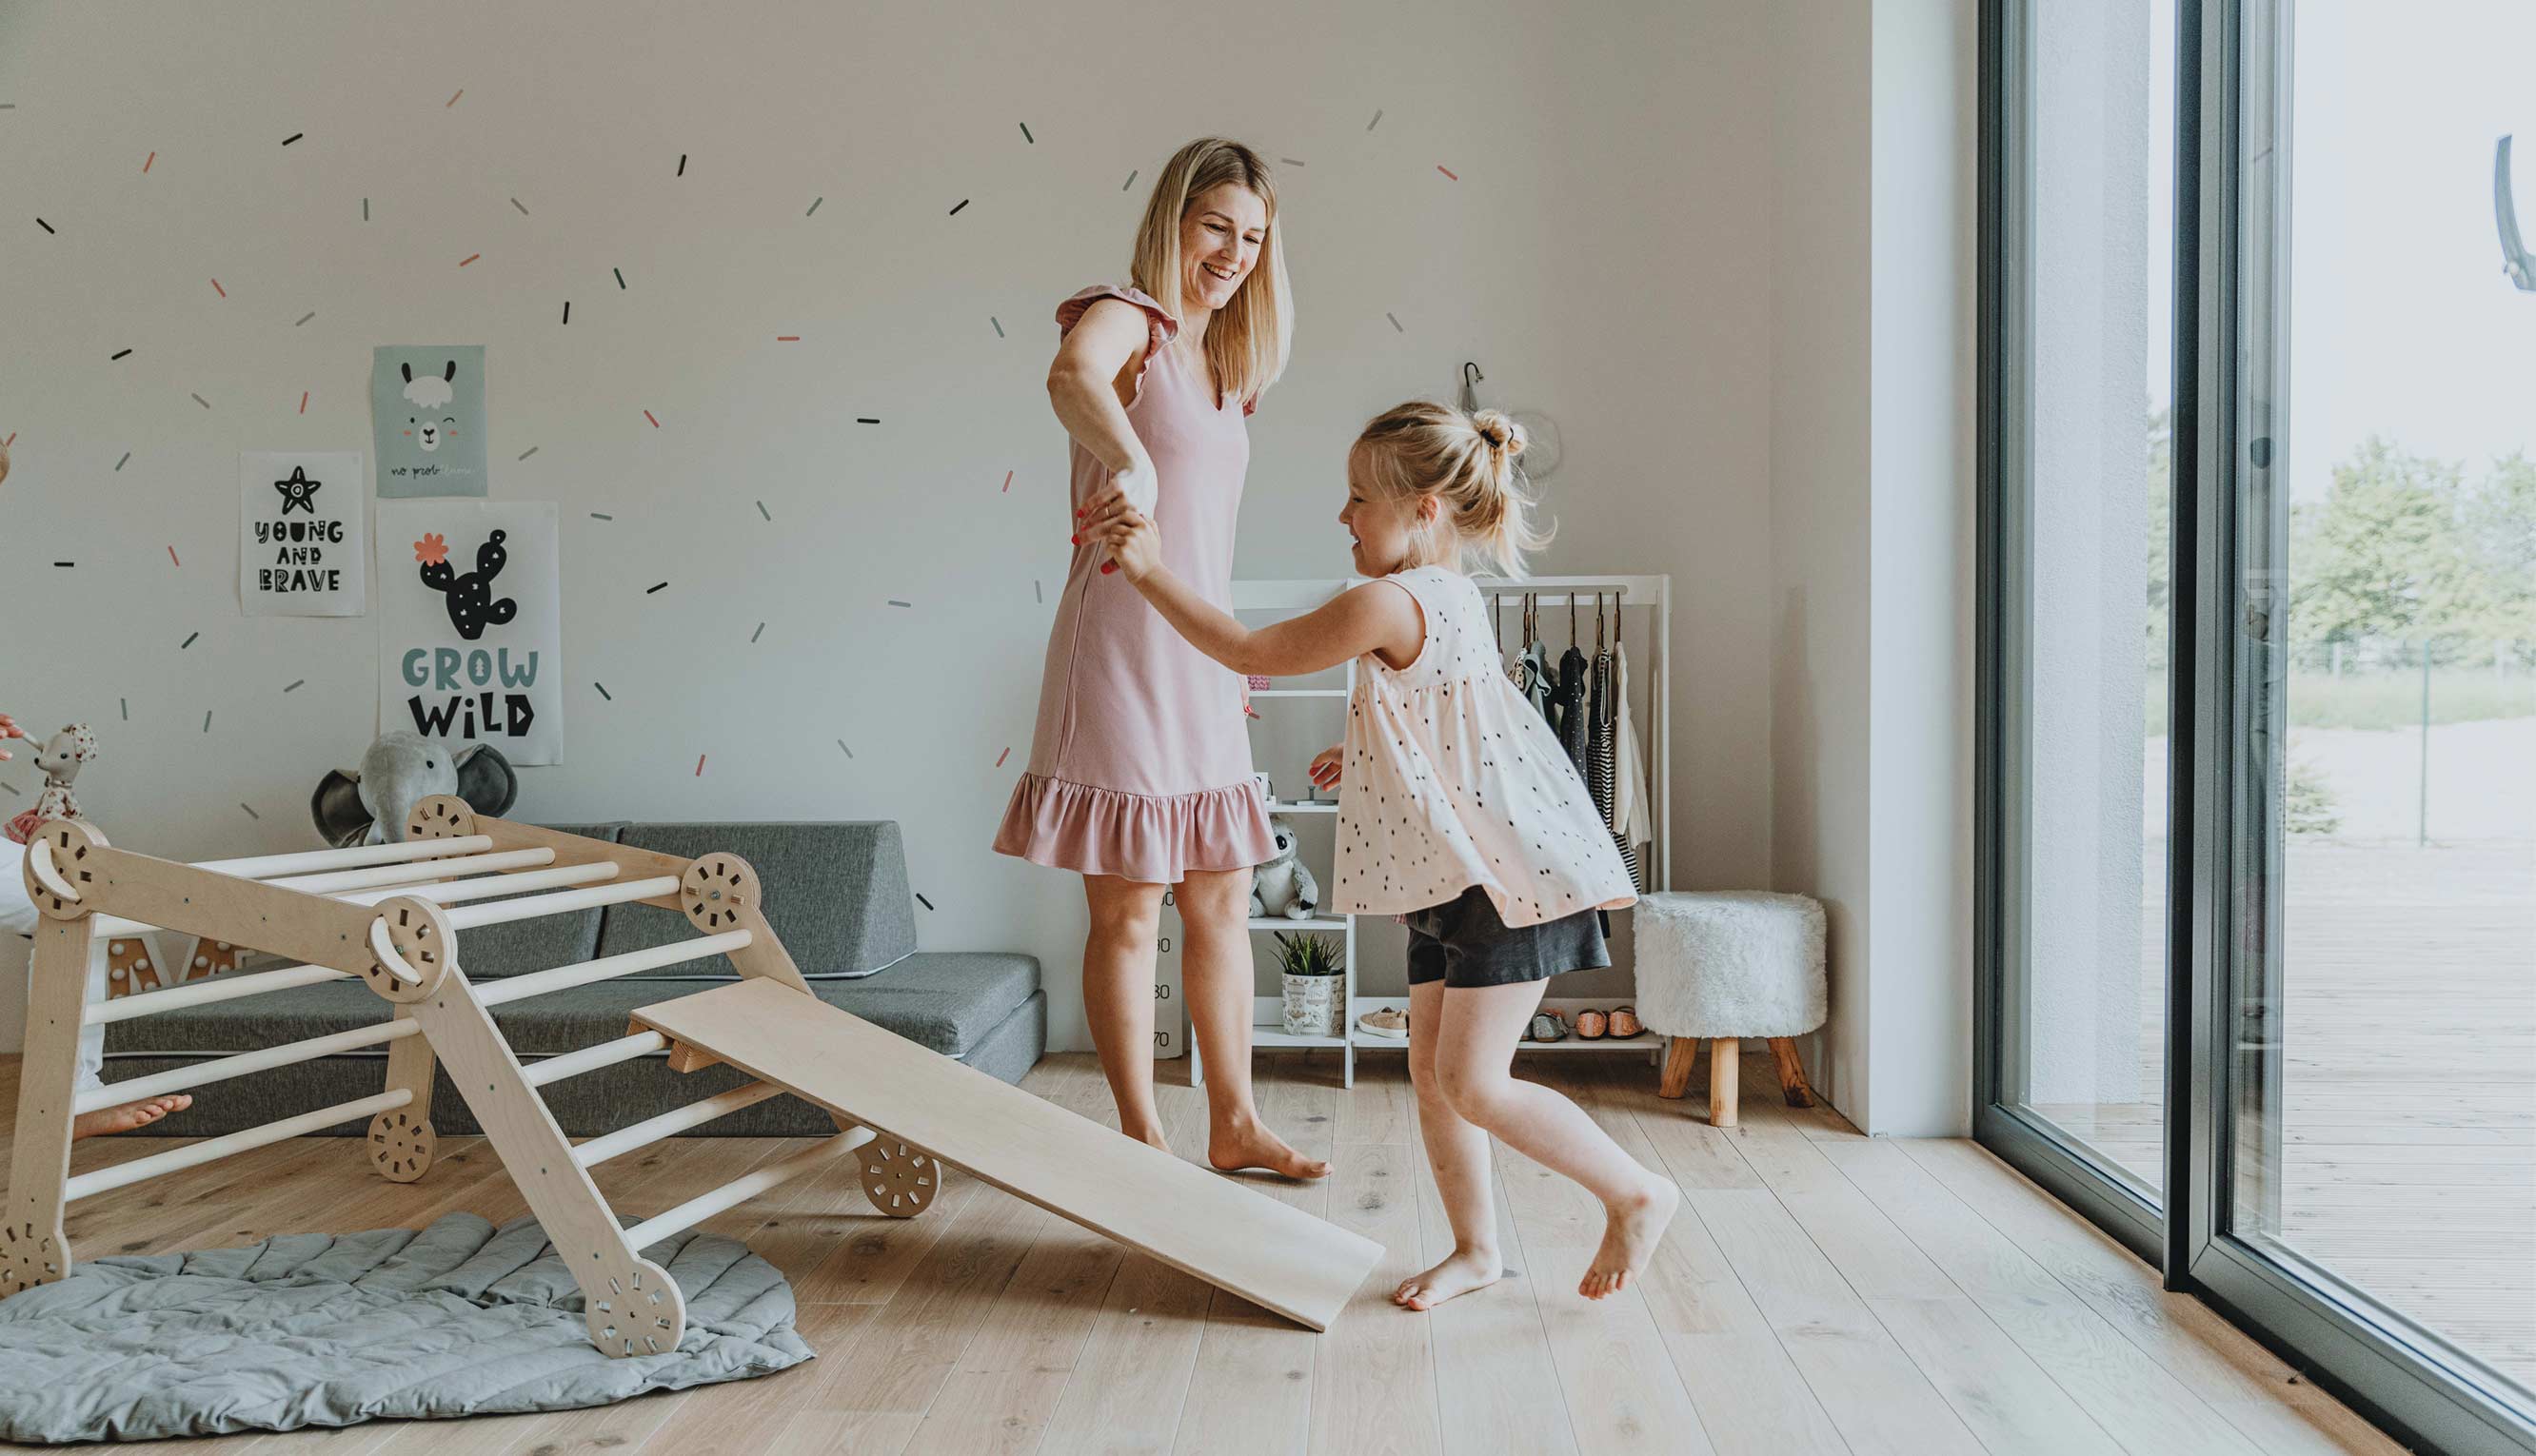 A mother and daughter playing with a wooden slide in a living room.